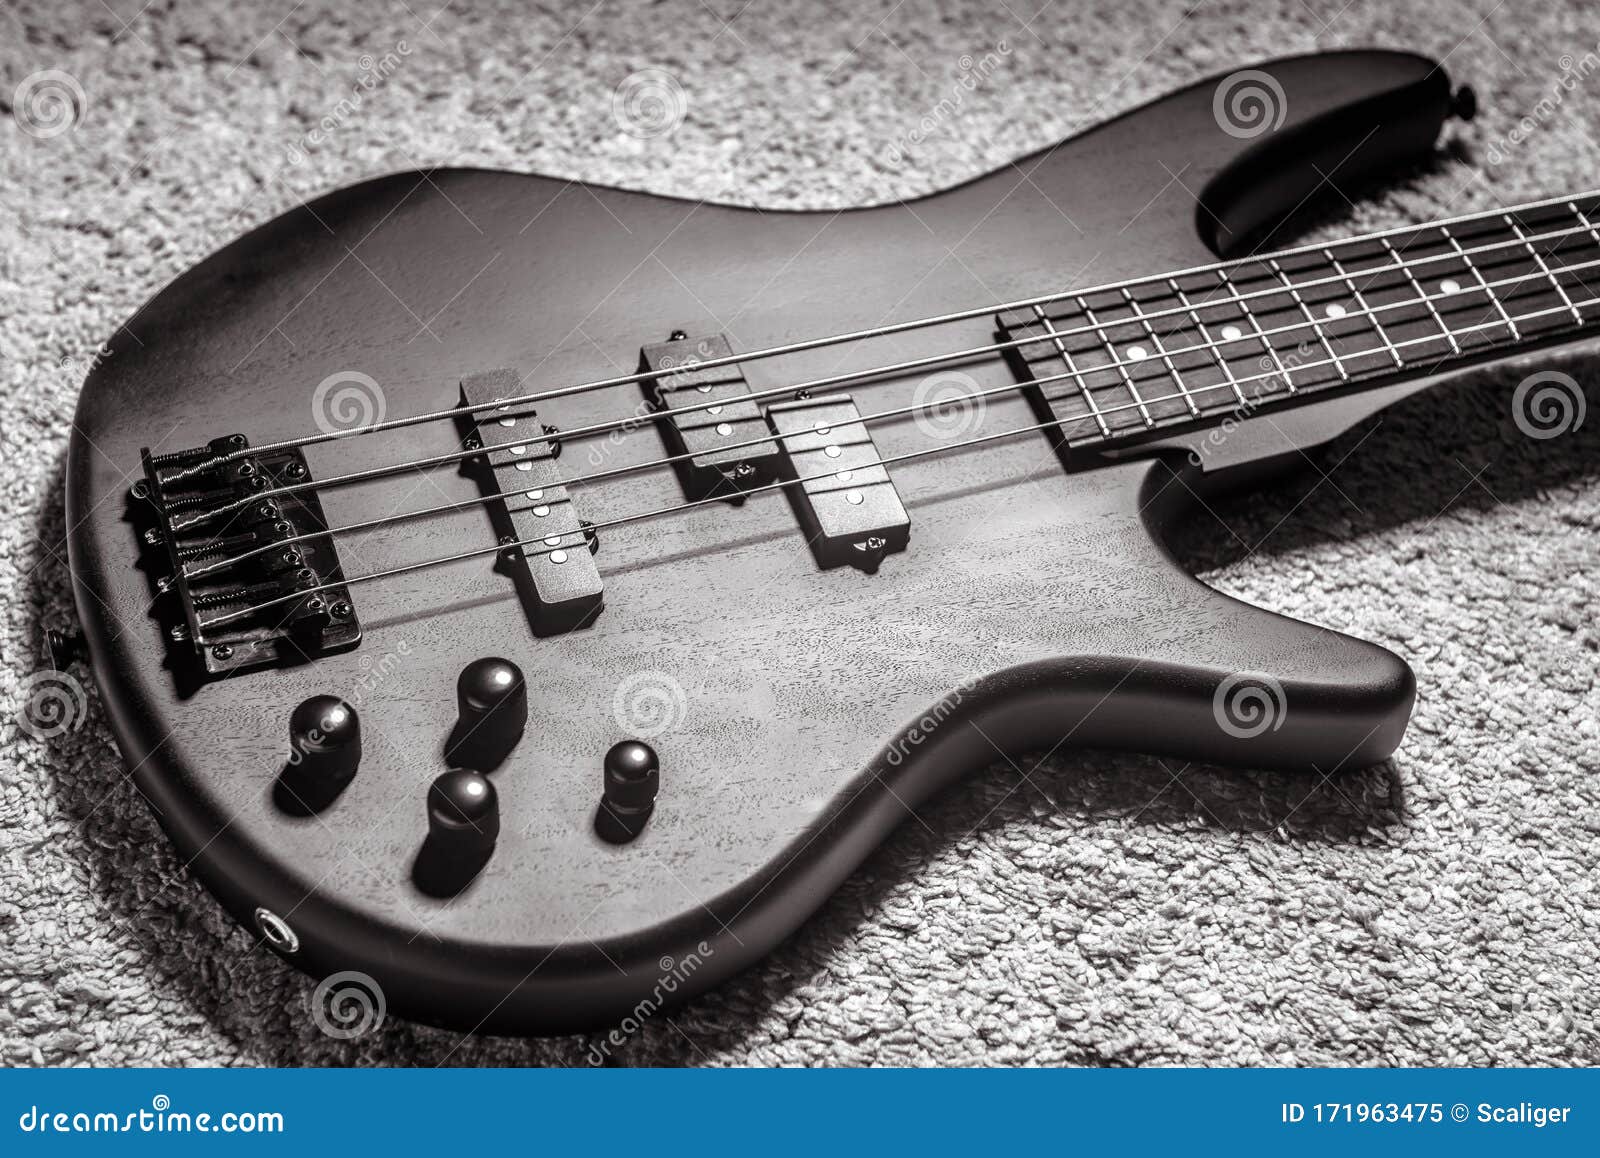 bass guitar with four strings in black and white. popular rock musical instrument. view of electric bass on carpet